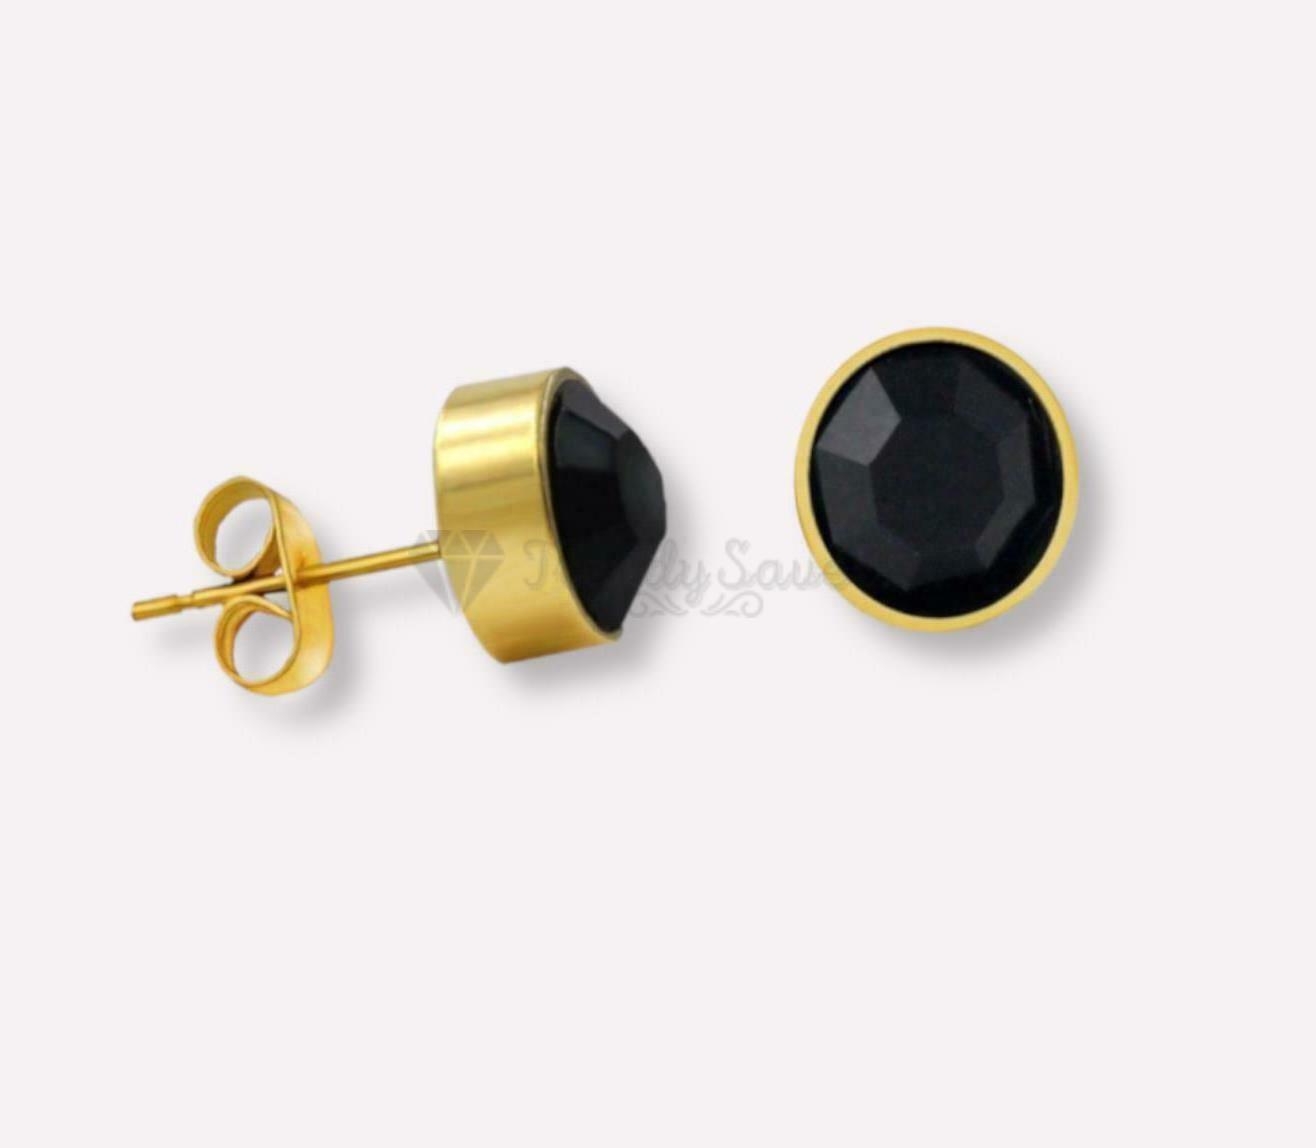 7MM Wide Gold Plated Onyx Black Stone Cartilage Piercing Stud Earrings Jewelry